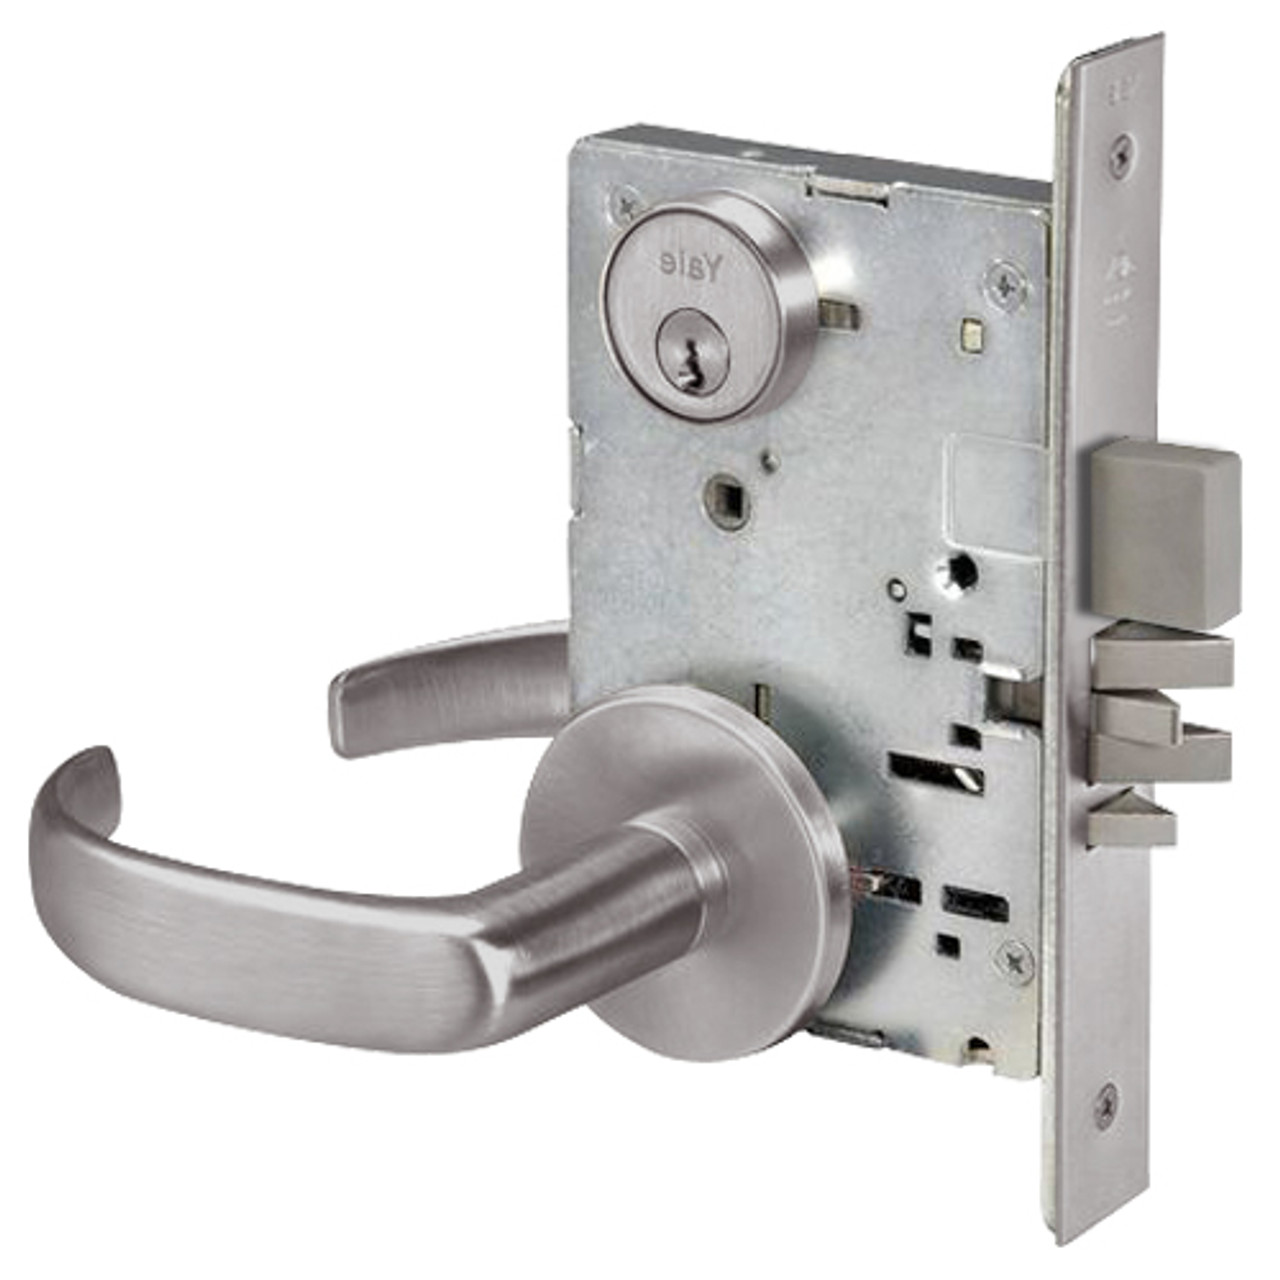 PBR8811-2FL-630 Yale 8800FL Series Double Cylinder Mortise Classroom Deadbolt Locks with Pacific Beach Lever in Satin Stainless Steel